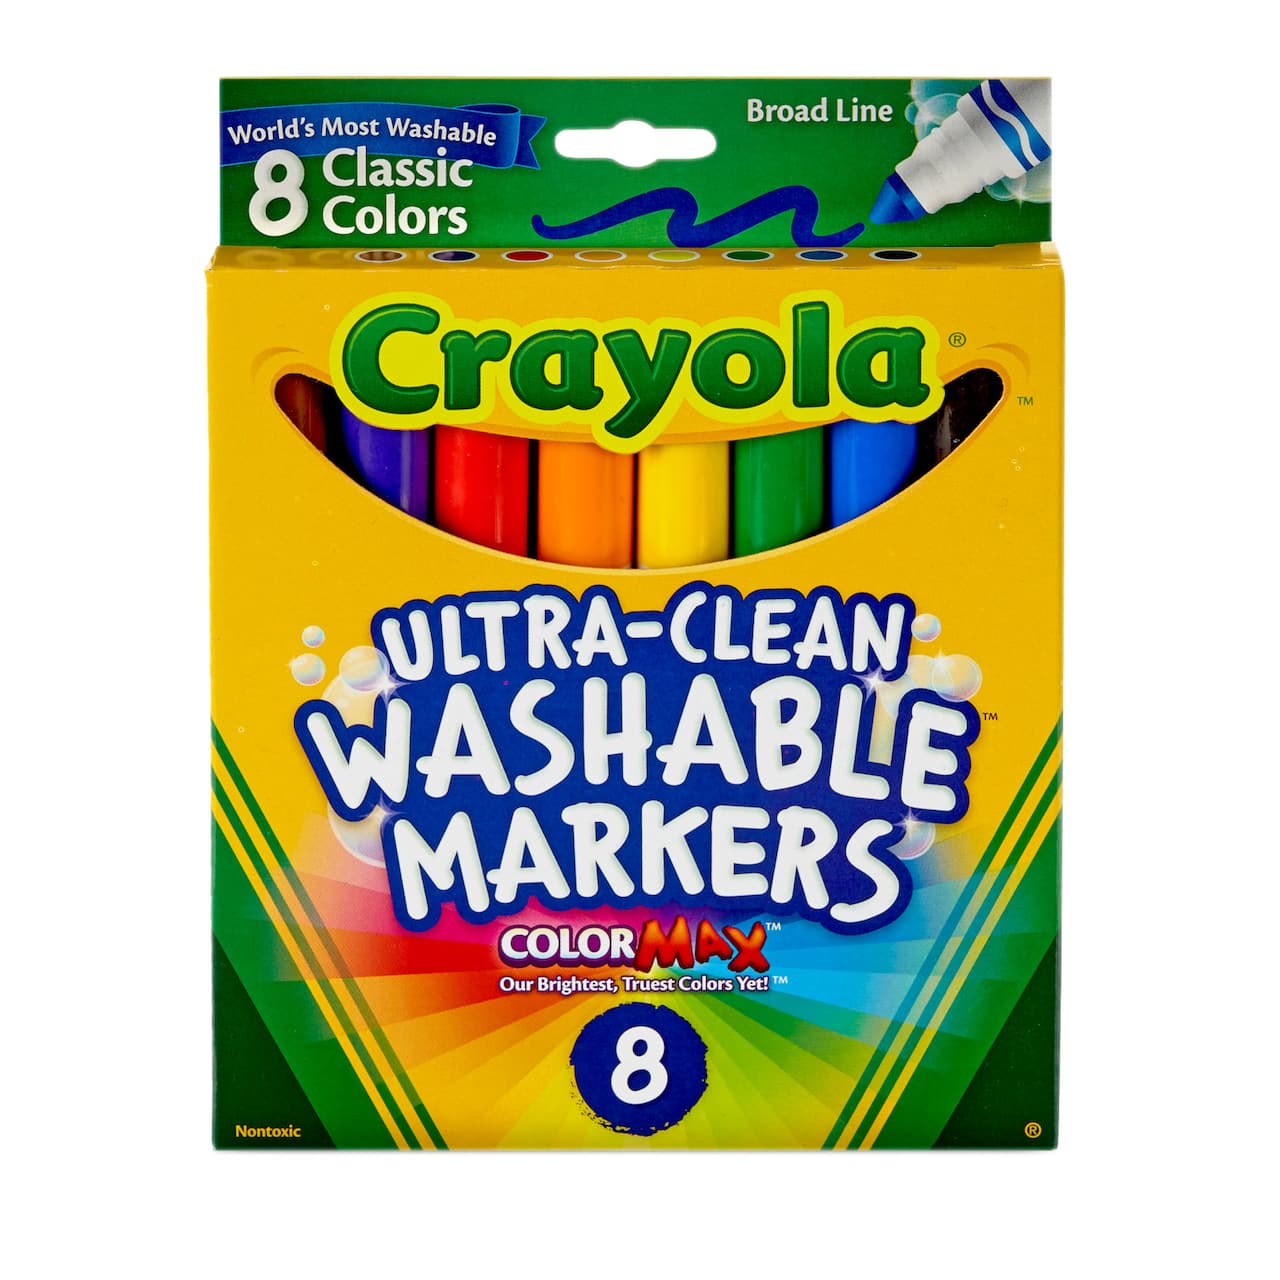 12 Packs: 8 ct. (96 total) Crayola® Washable™ Classic Broad Line Marker Set